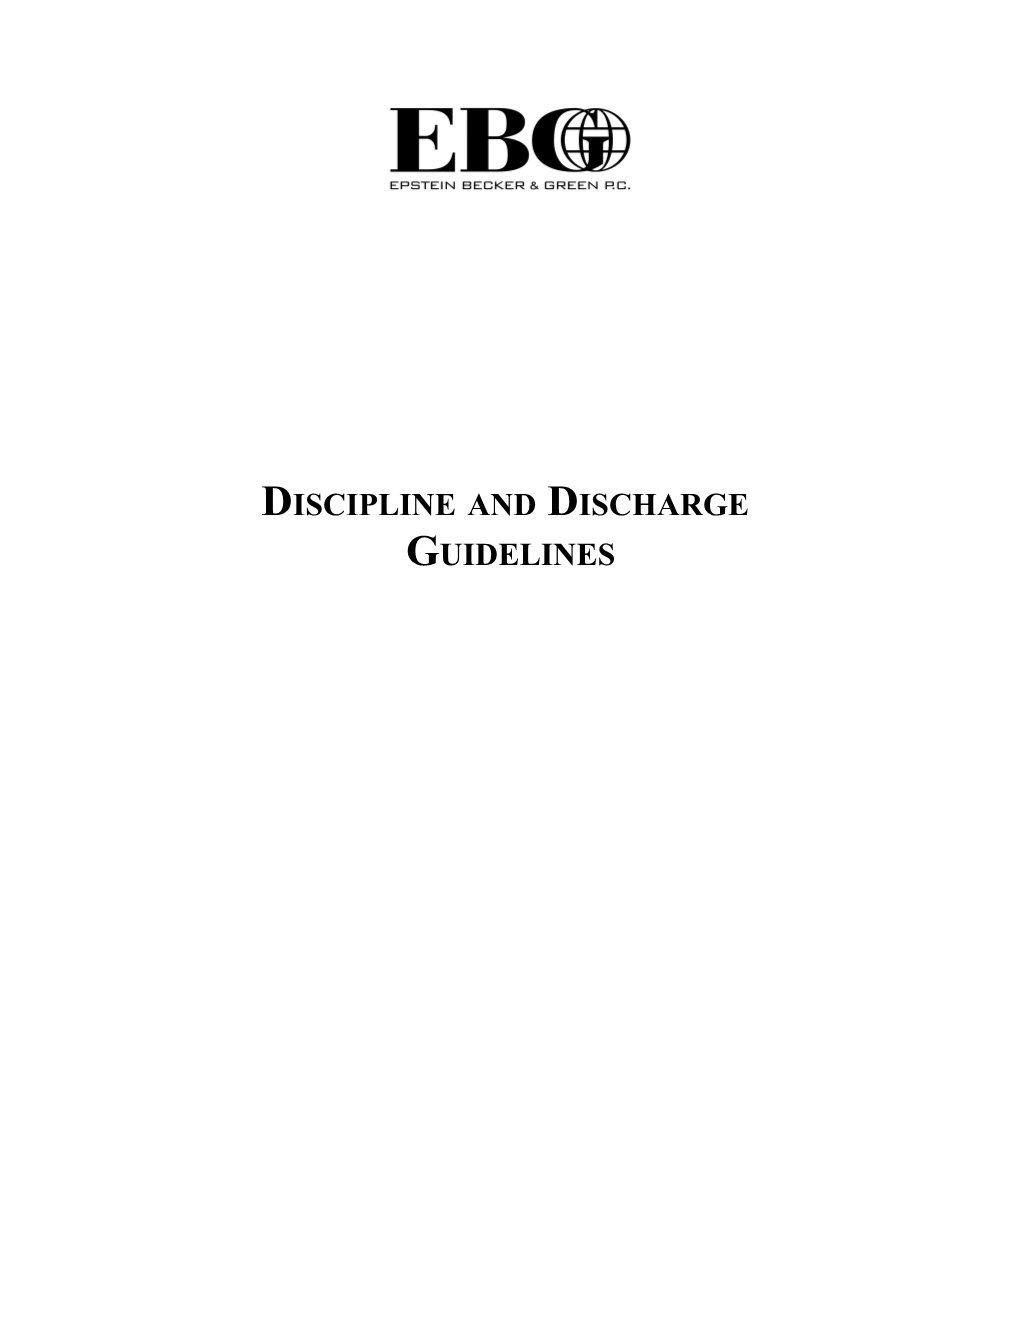 Discipline and Discharge Guidelines